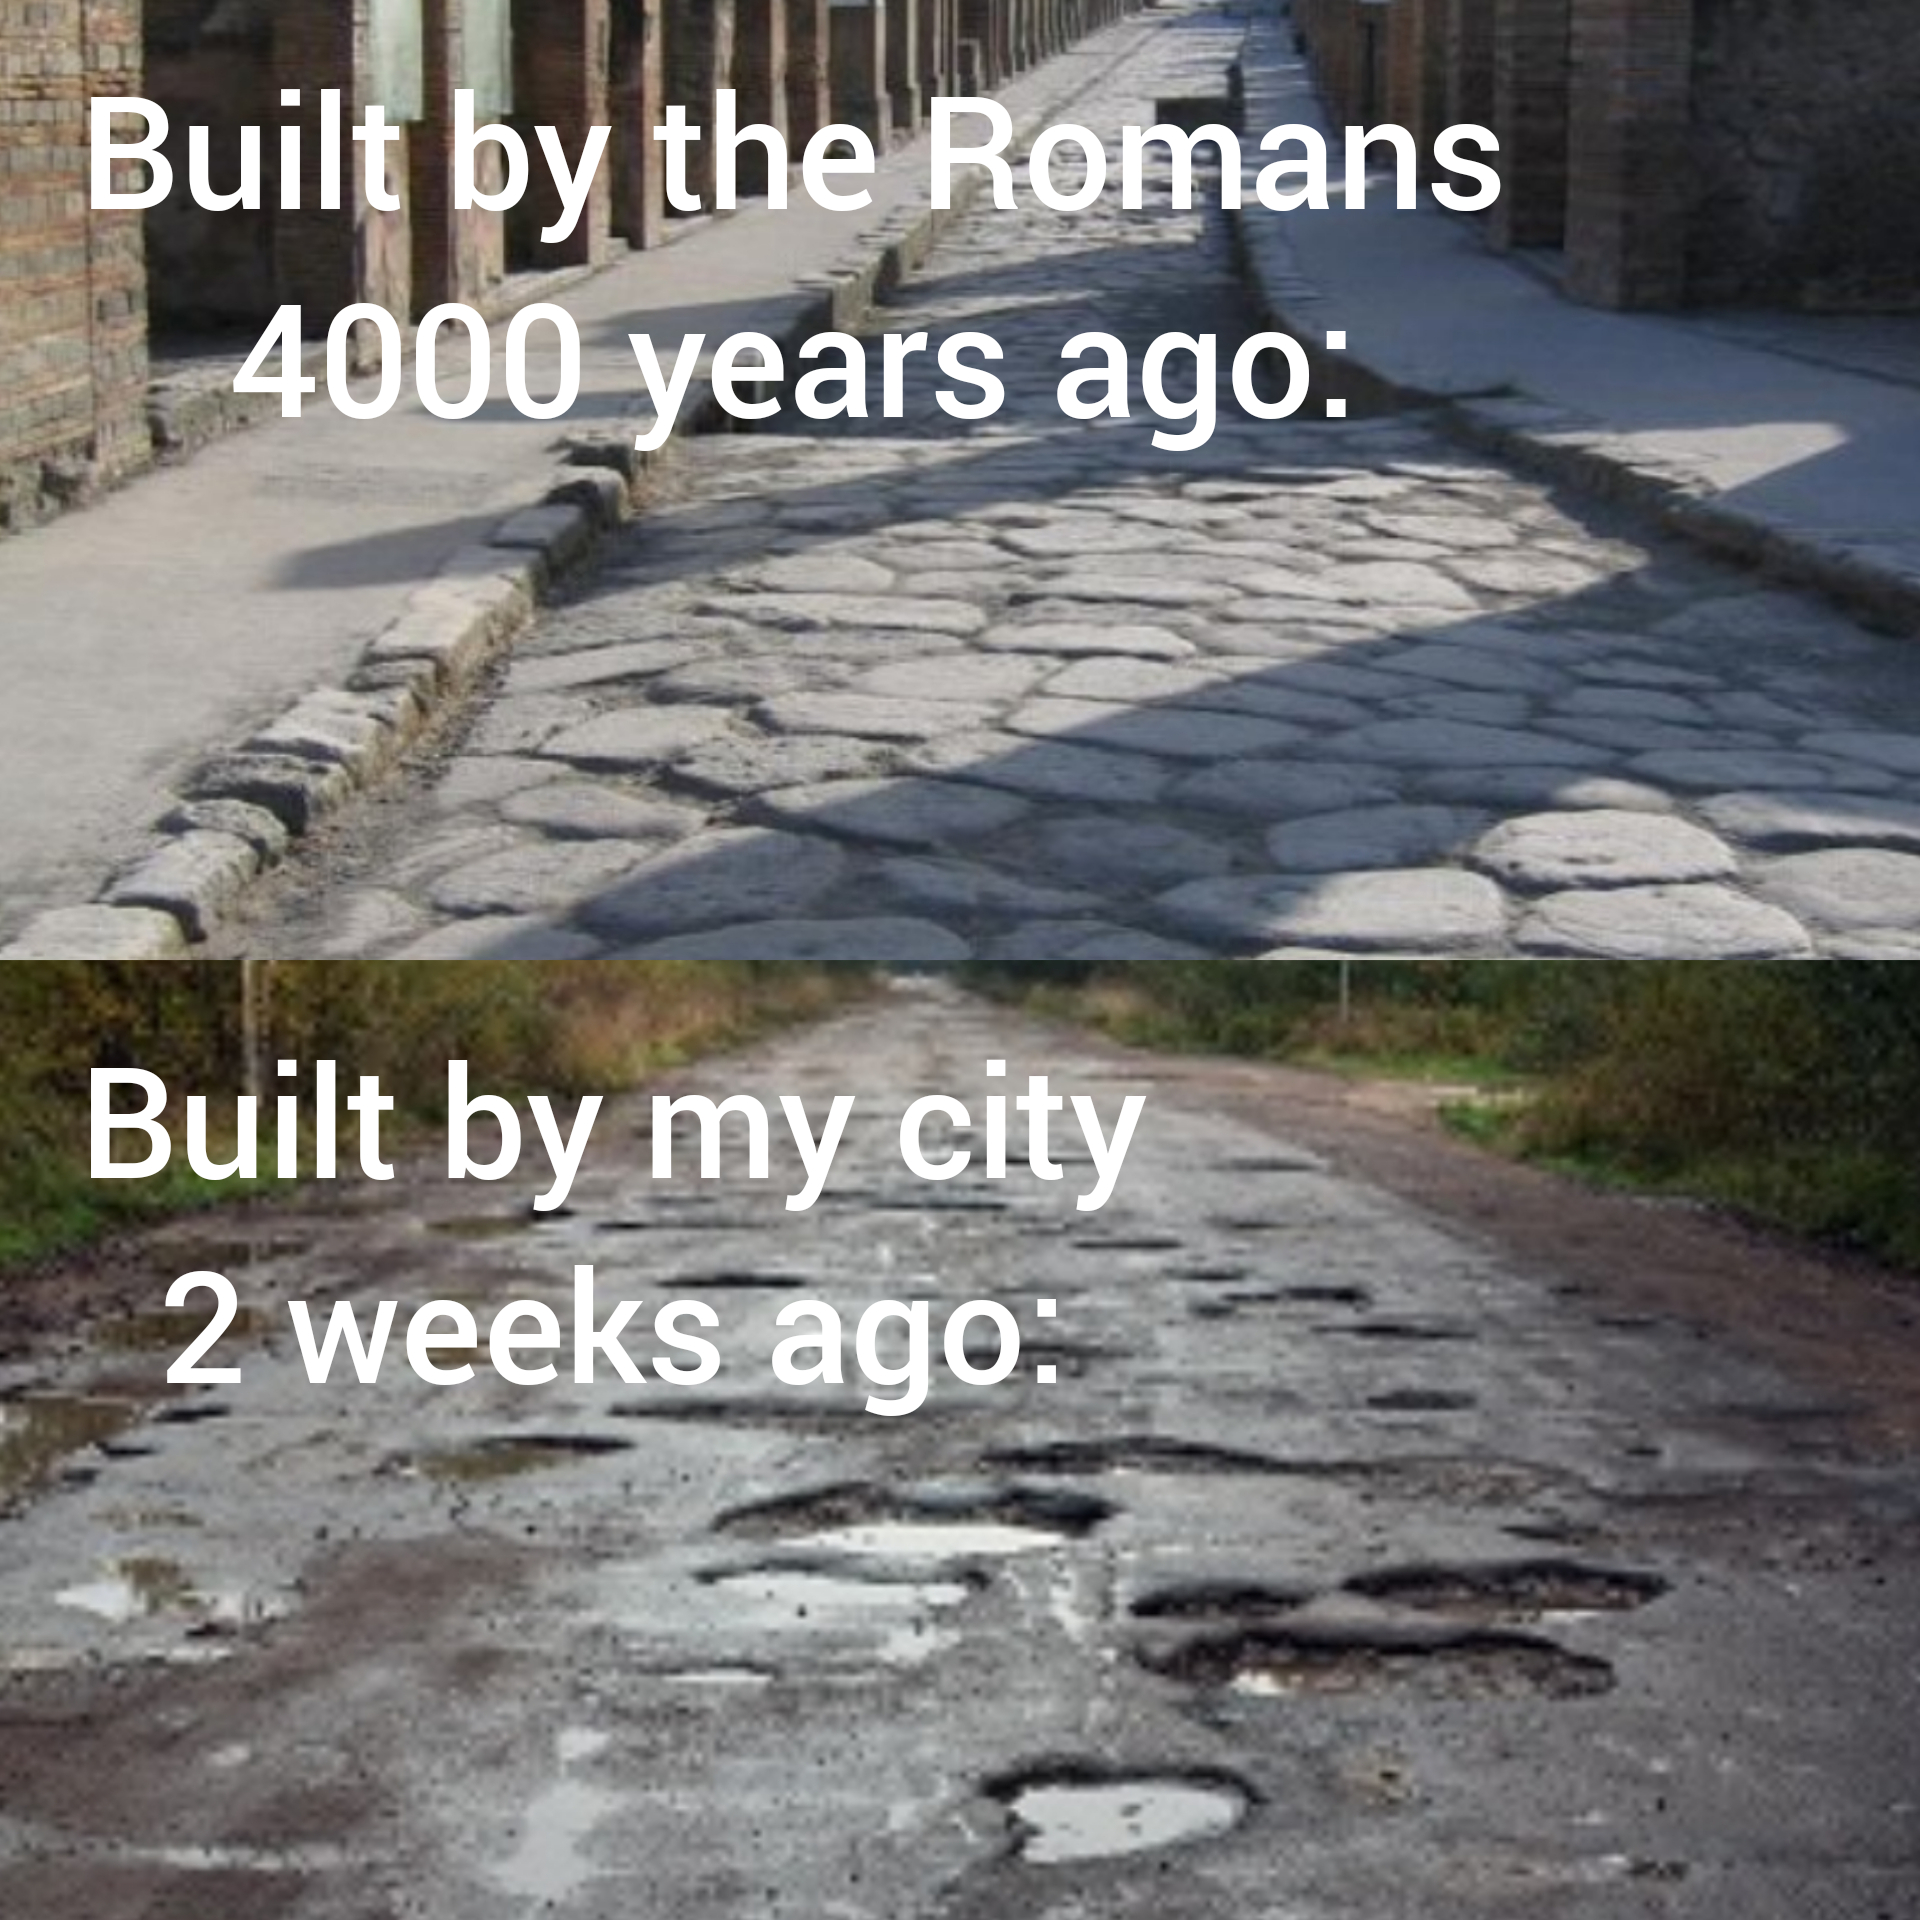 paved road potholes - Built by the Romans 4000 years ago Built by my city 2 weeks ago